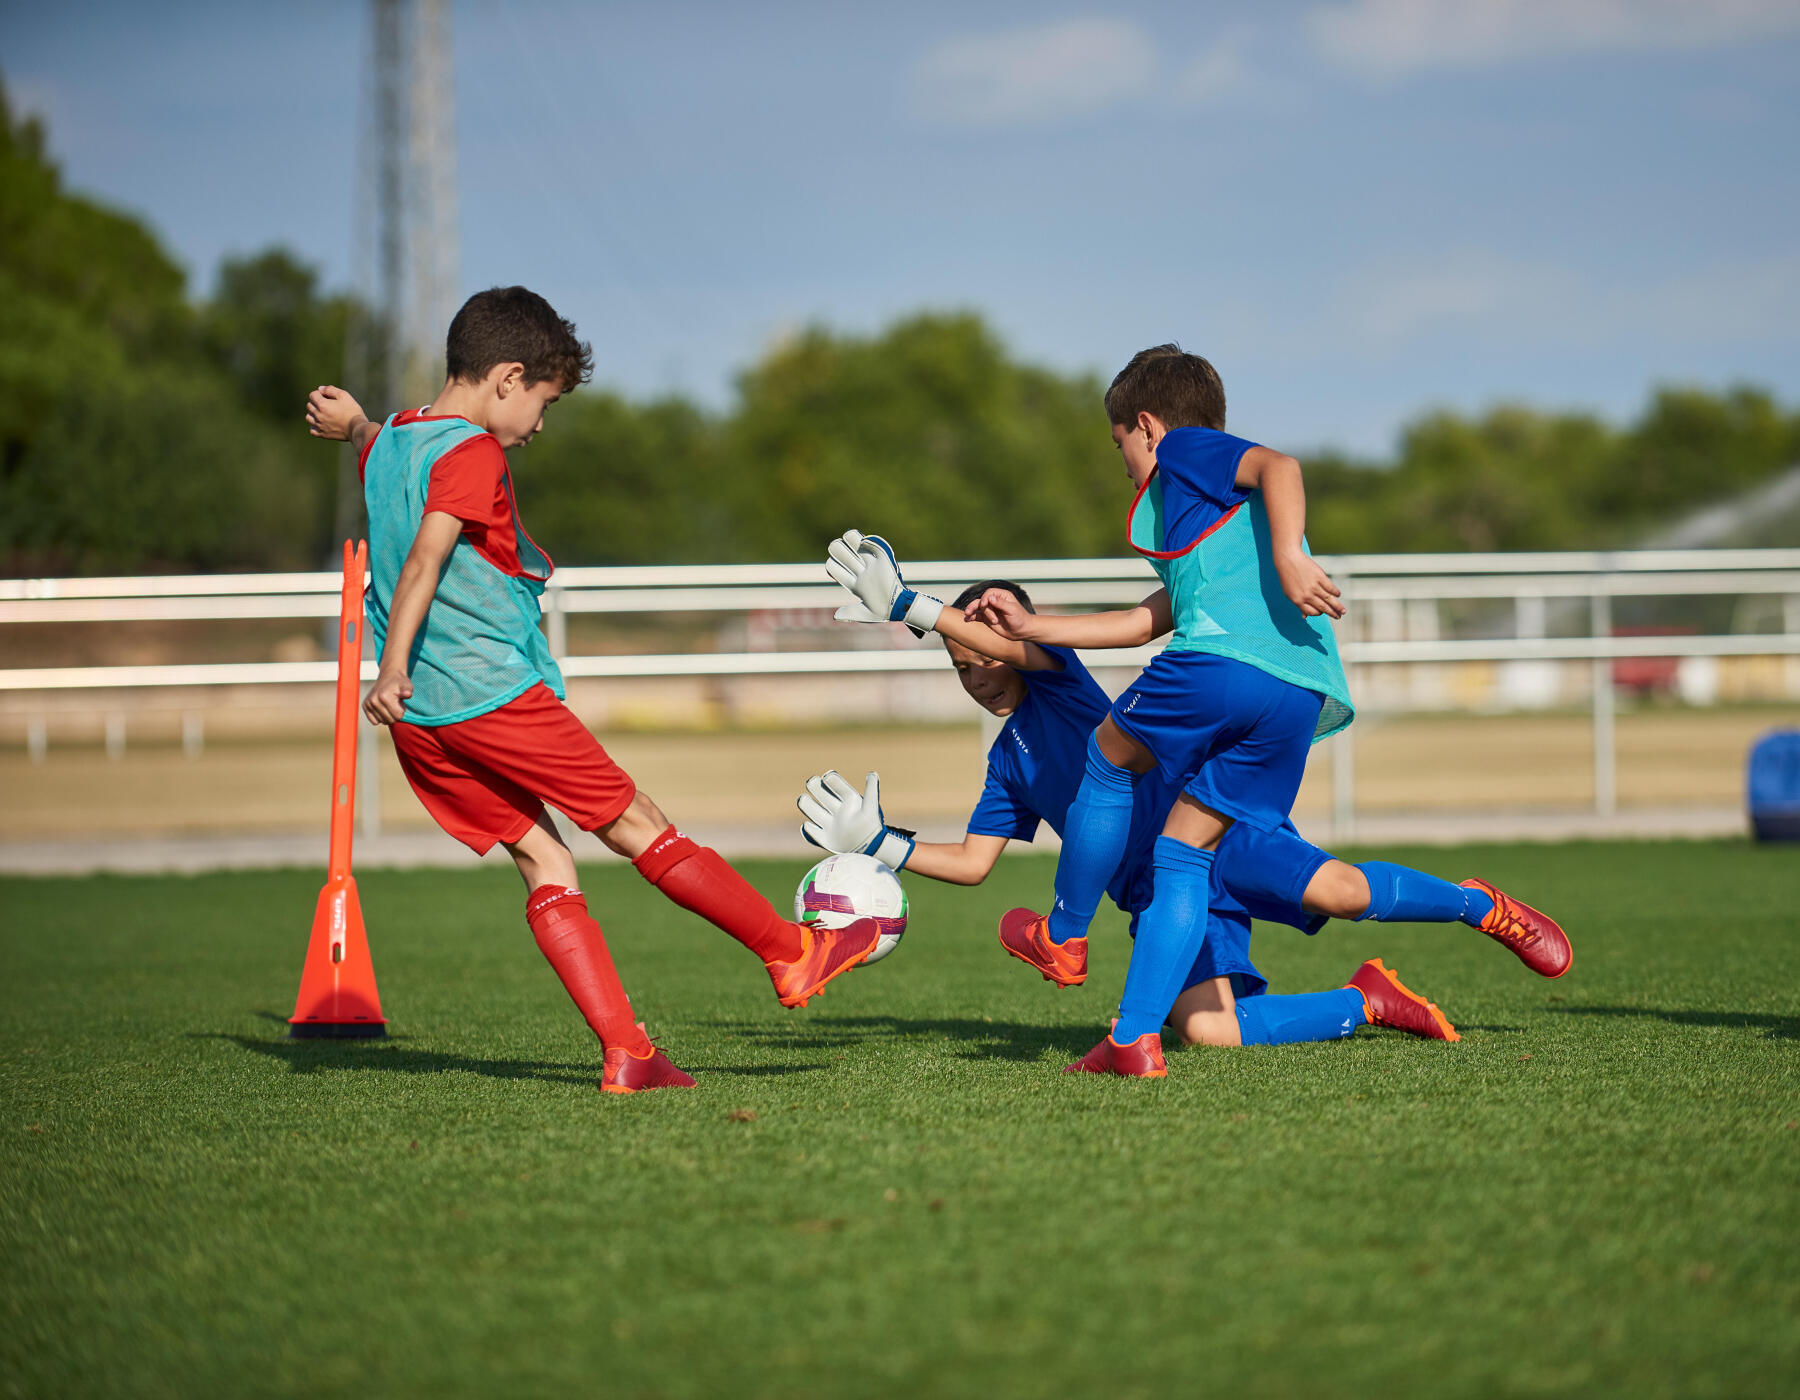 Your child wants to be a goalkeeper. What can you do to help them?